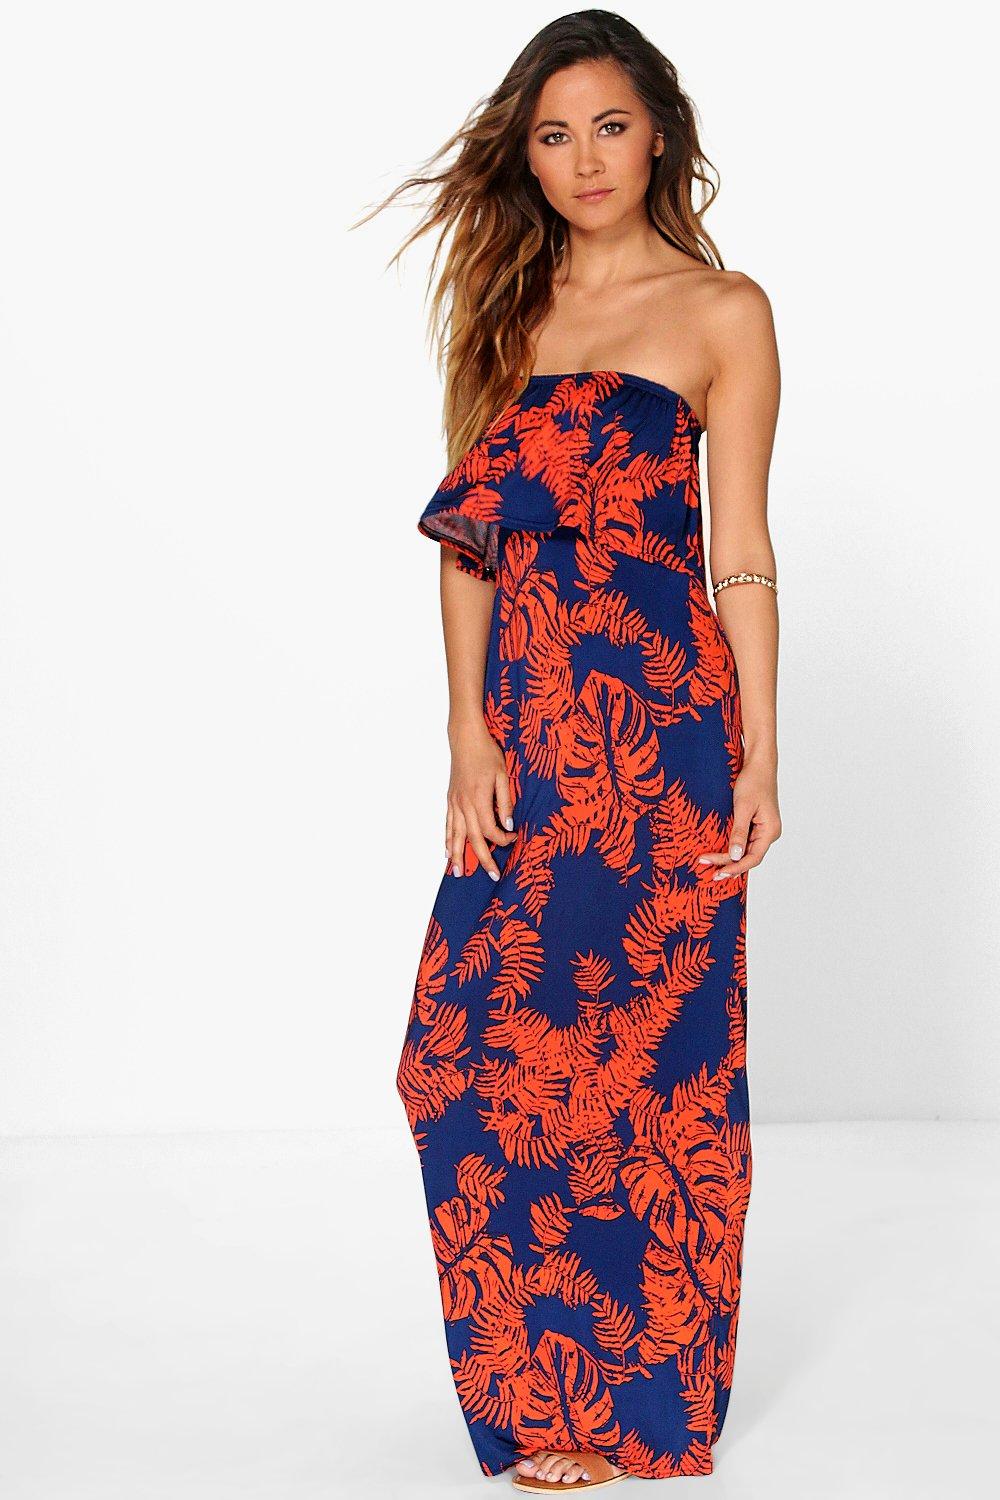 Maxi Dresses A Perfect Choice For All Type of Body Shapes ...